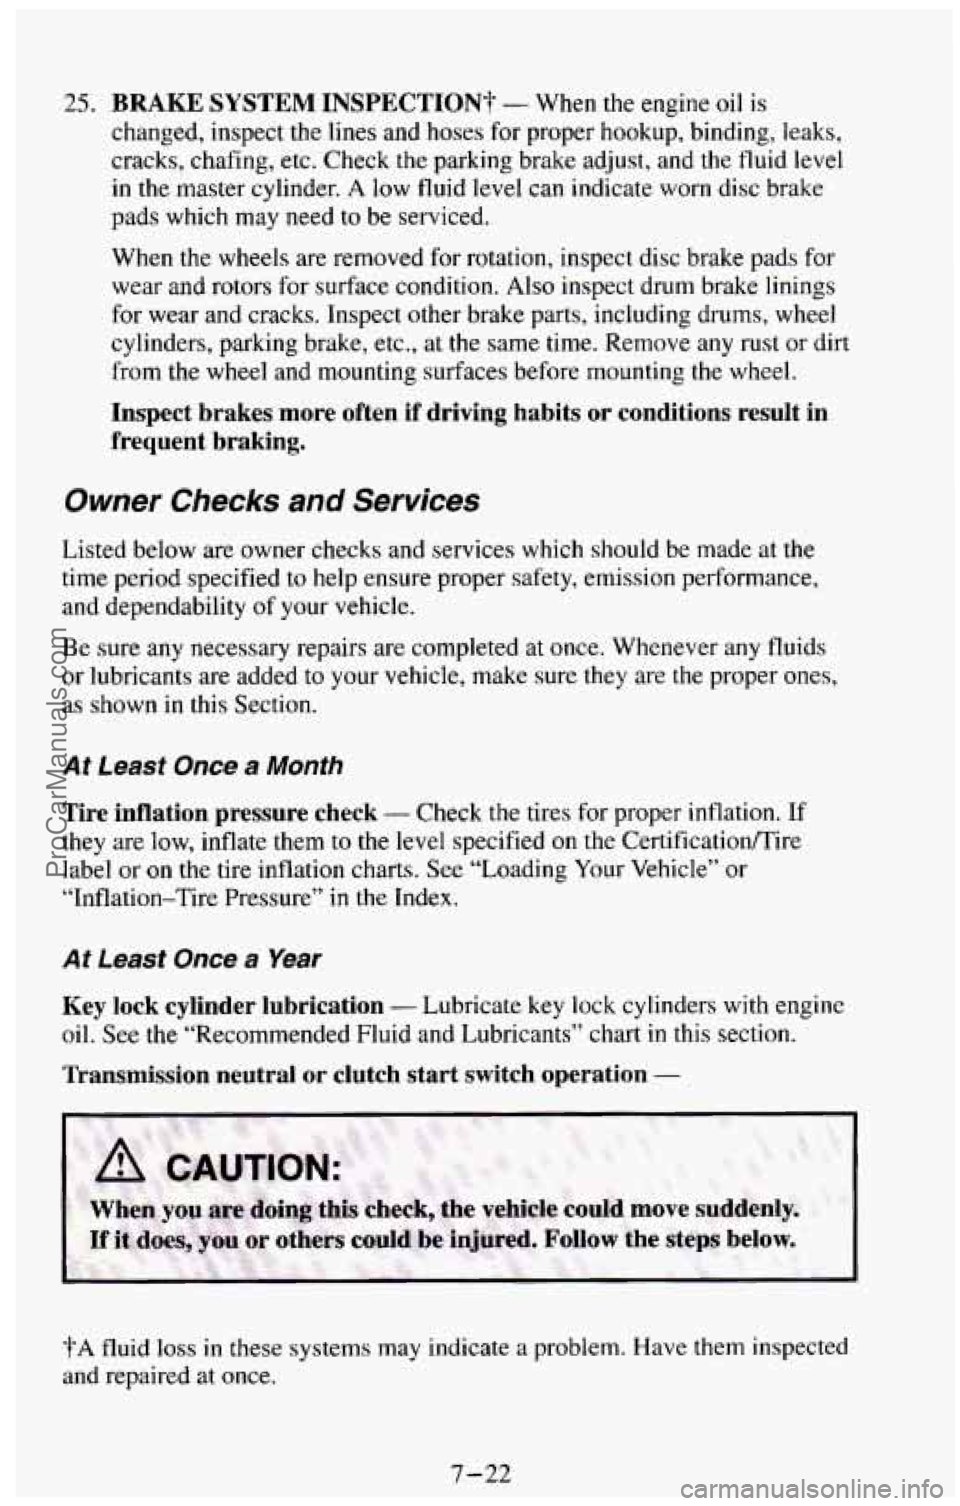 CHEVROLET SUBURBAN 1994  Owners Manual 25. BRAKE  SYSTEM  INSPECTION? - When  the engine oil is 
changed,  inspect  the 
lines and  hoses for proper  hookup,  binding,  leaks, 
cracks,  chafing,  etc.  Check 
the parking  brake  adjust,  a